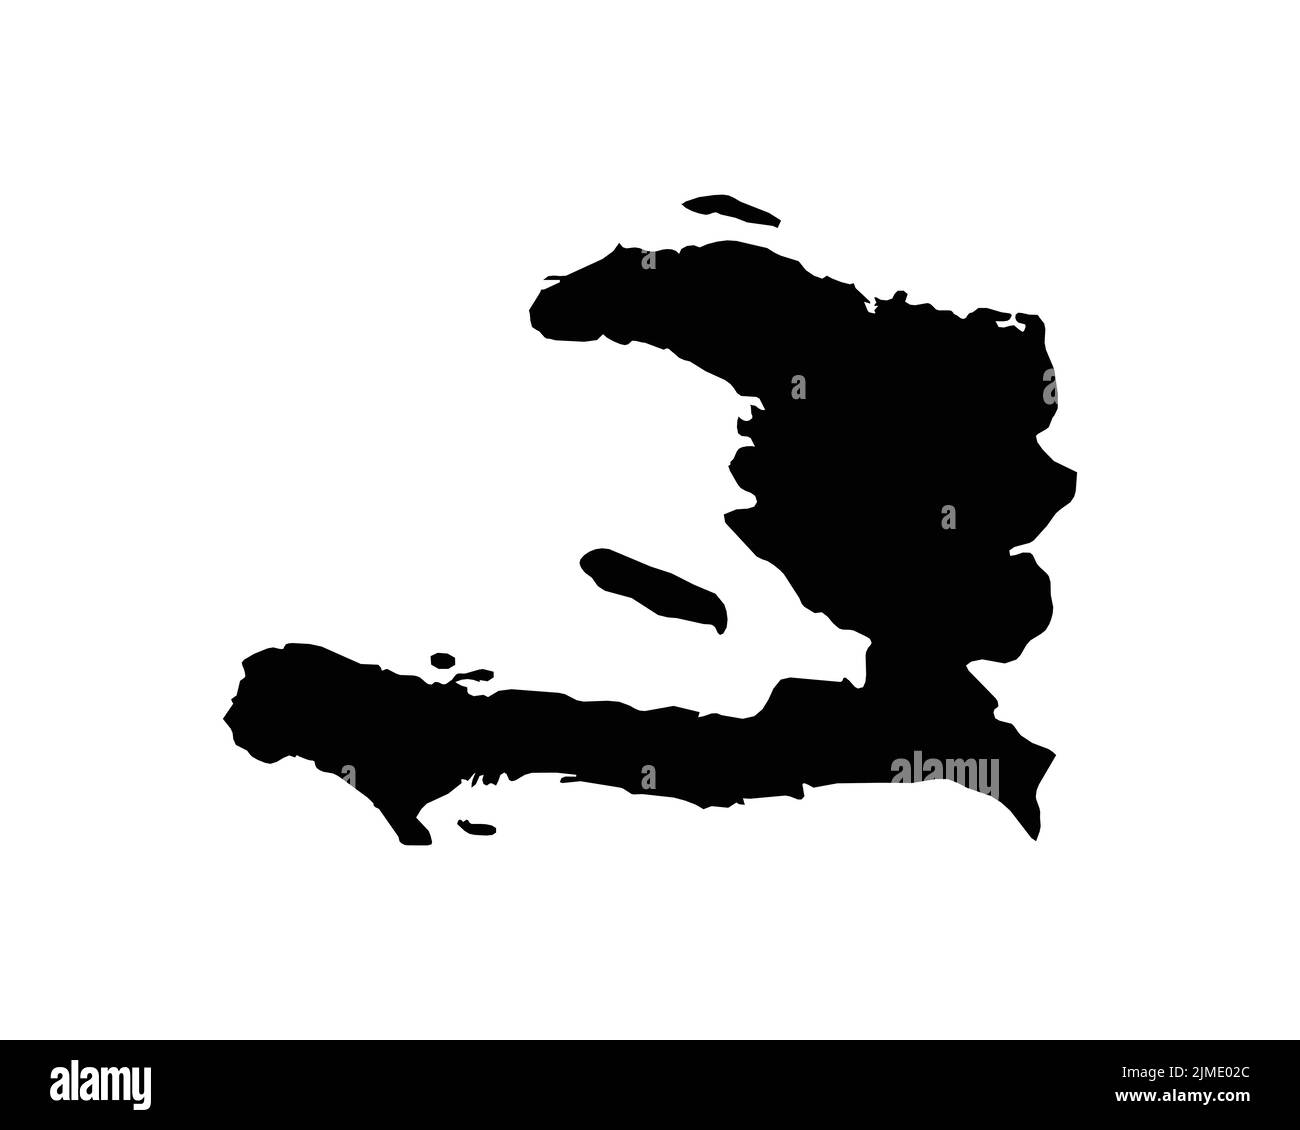 Haiti Map. Haitian Country Map. Hayti Black and White National Nation Outline Geography Border Boundary Shape Territory Vector Illustration EPS Clipar Stock Vector